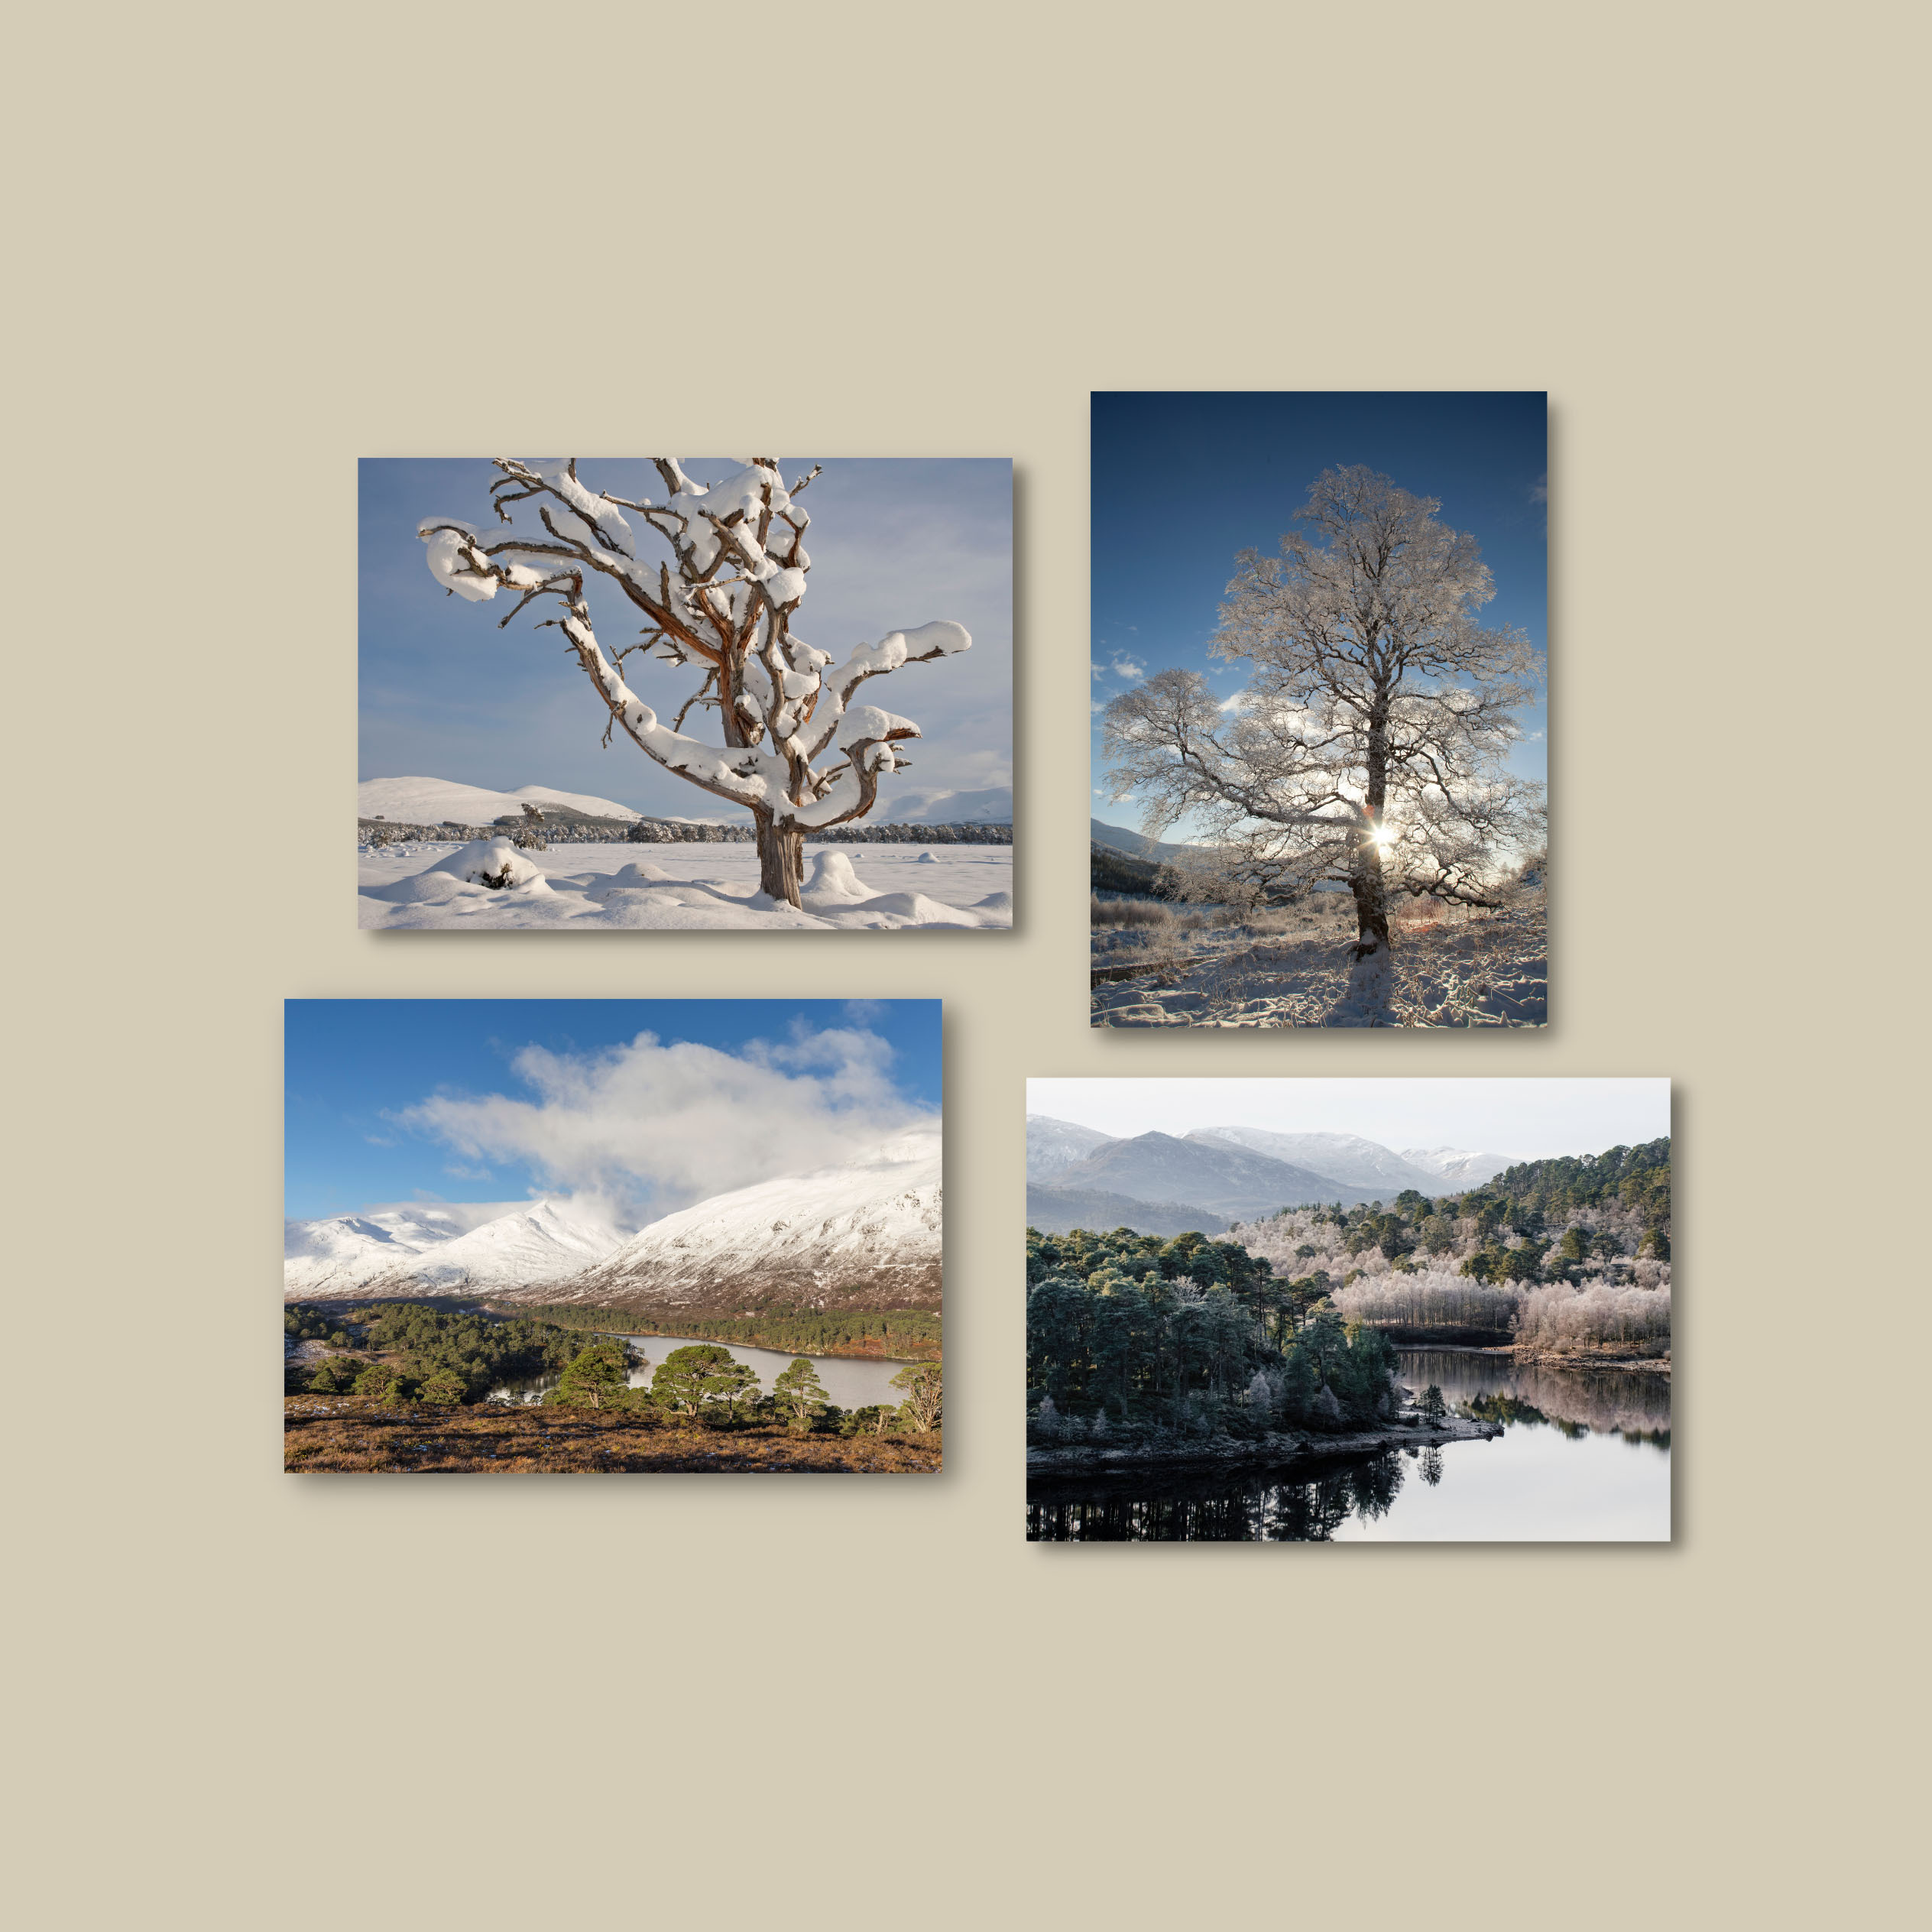 NEW Landscape greetings cards